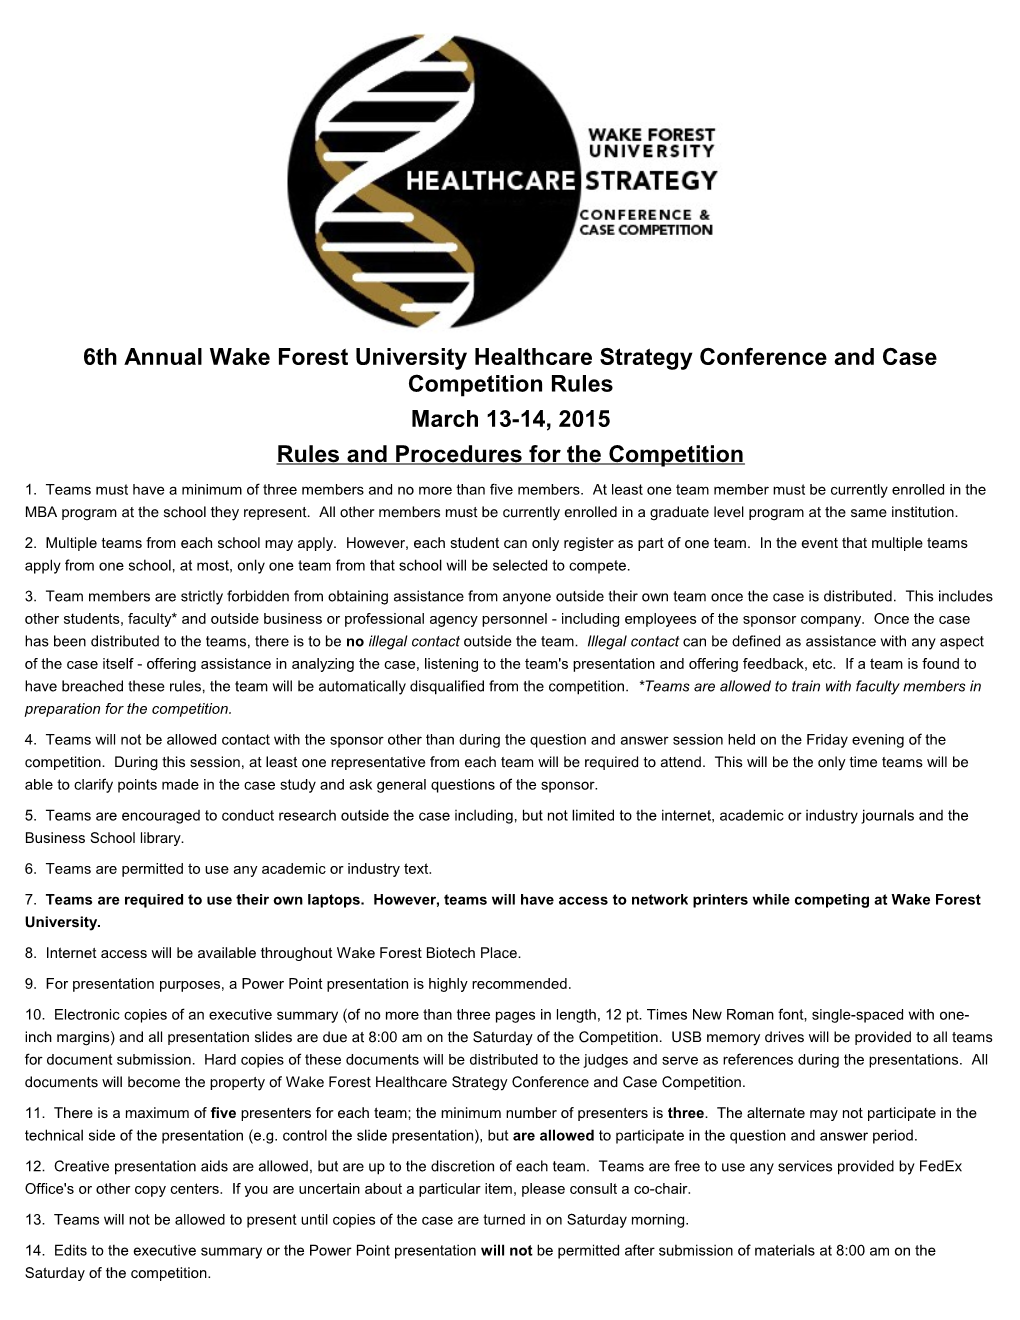 6Th Annual Wake Forest University Healthcare Strategy Conference and Case Competition Rules